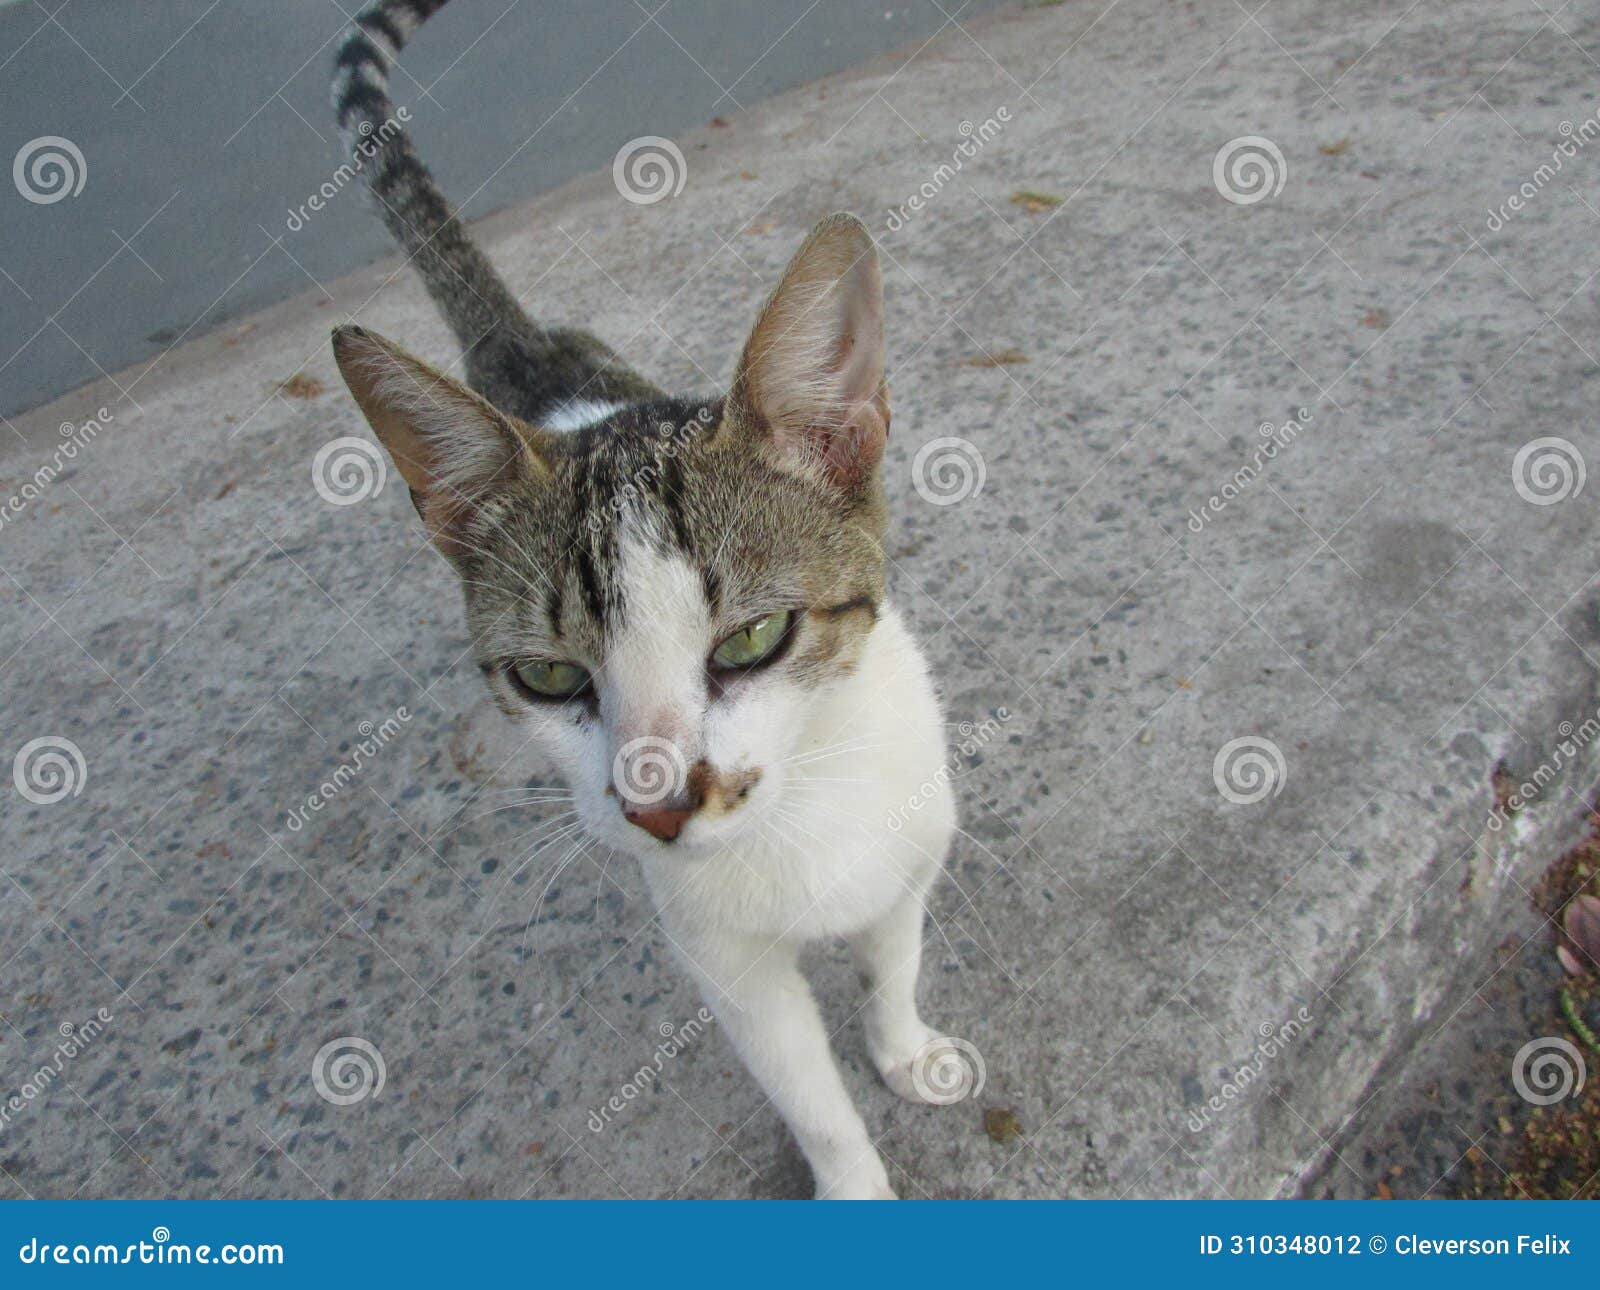 a small spotted cat on the city